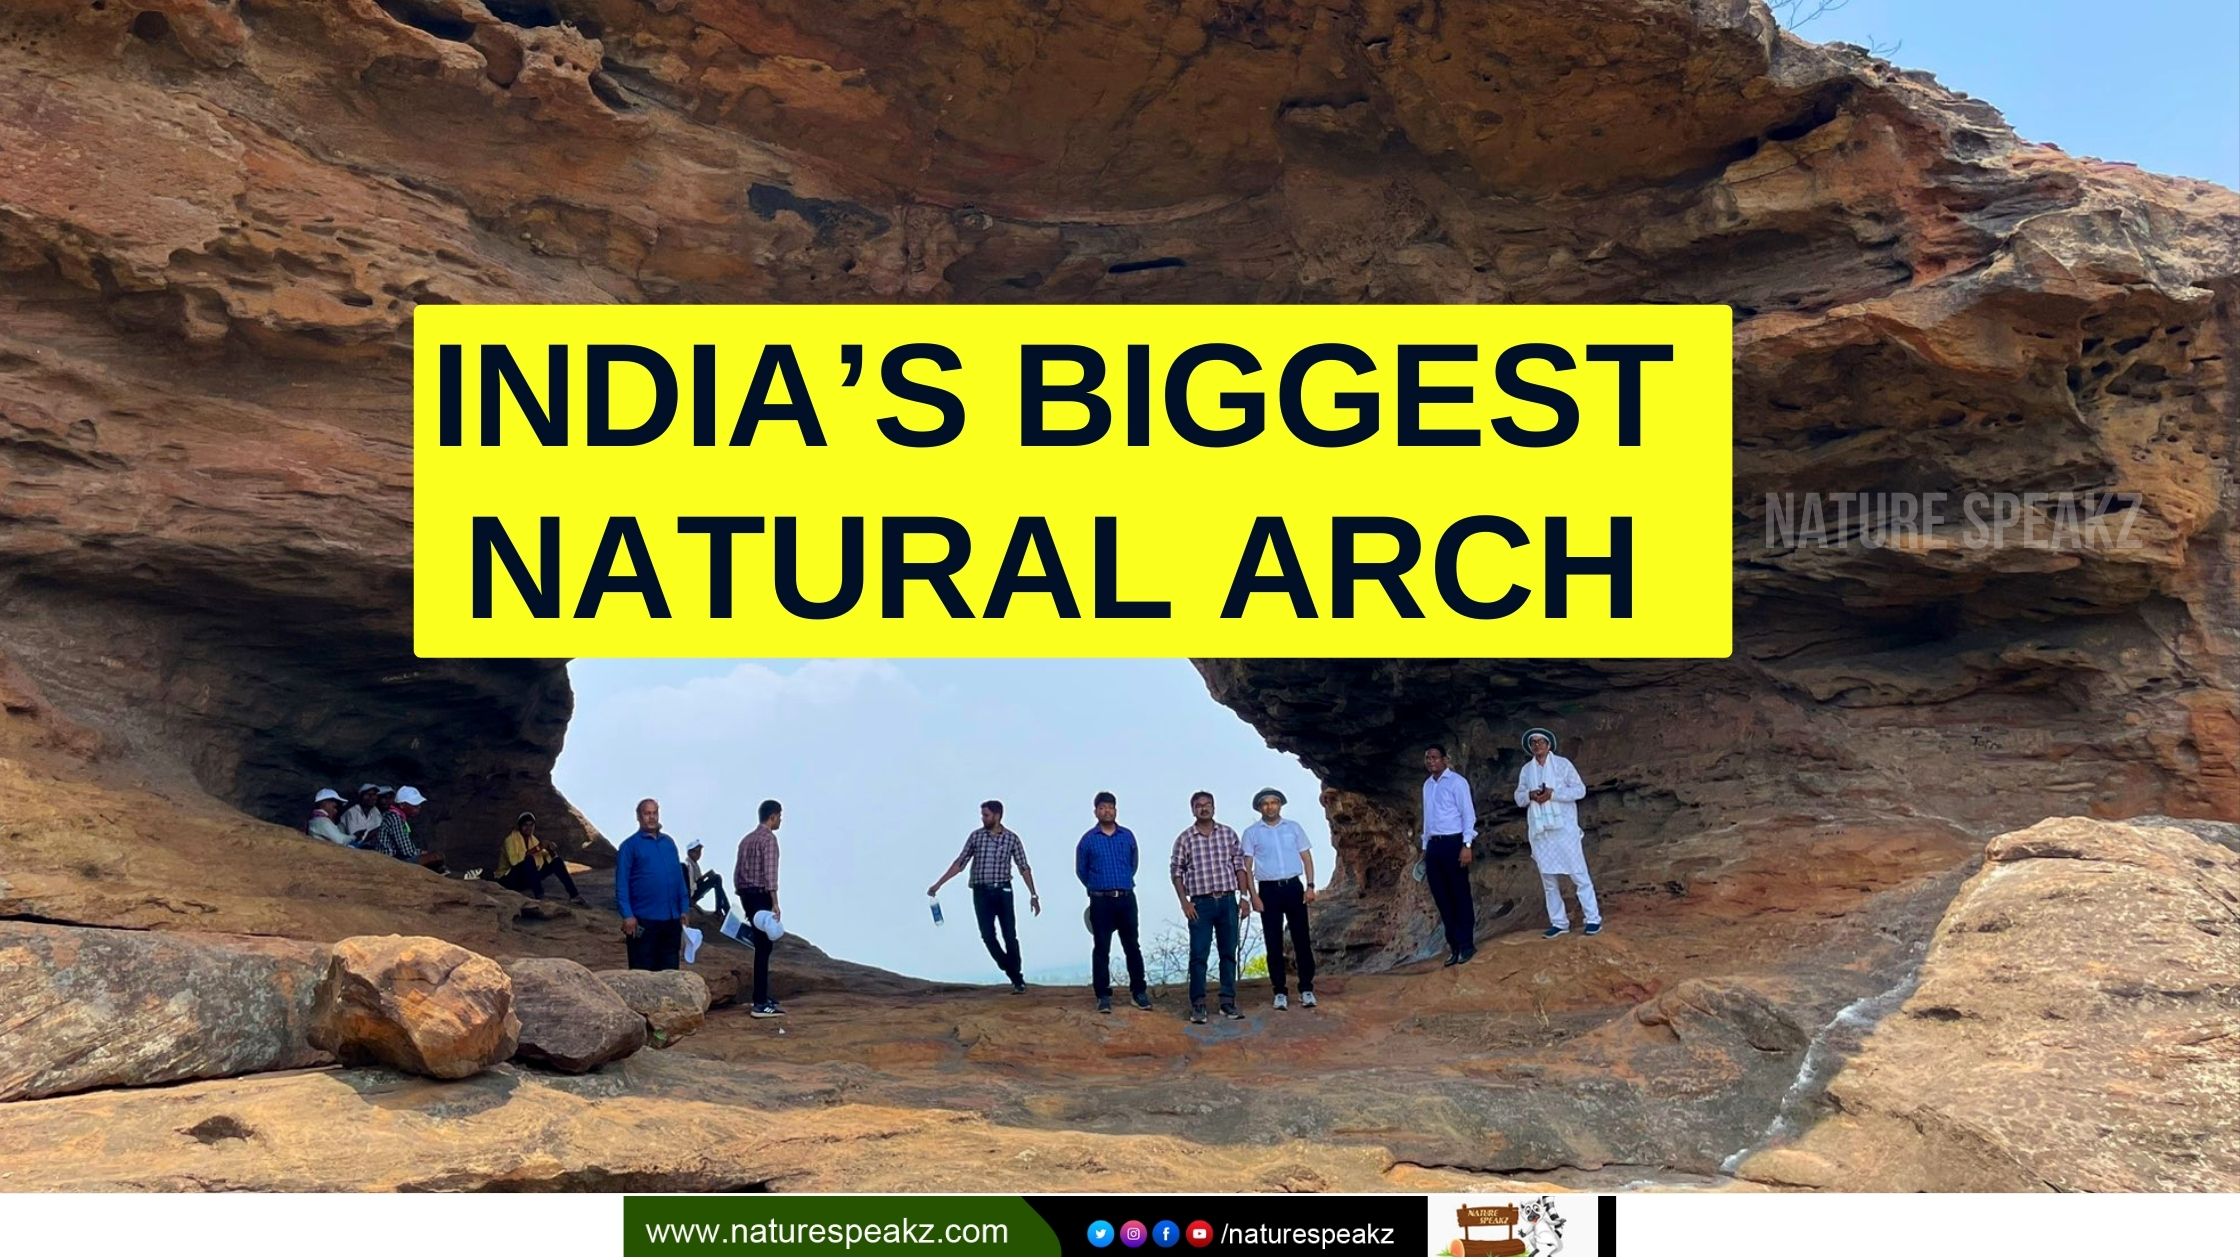 The Biggest Natural Arch of India